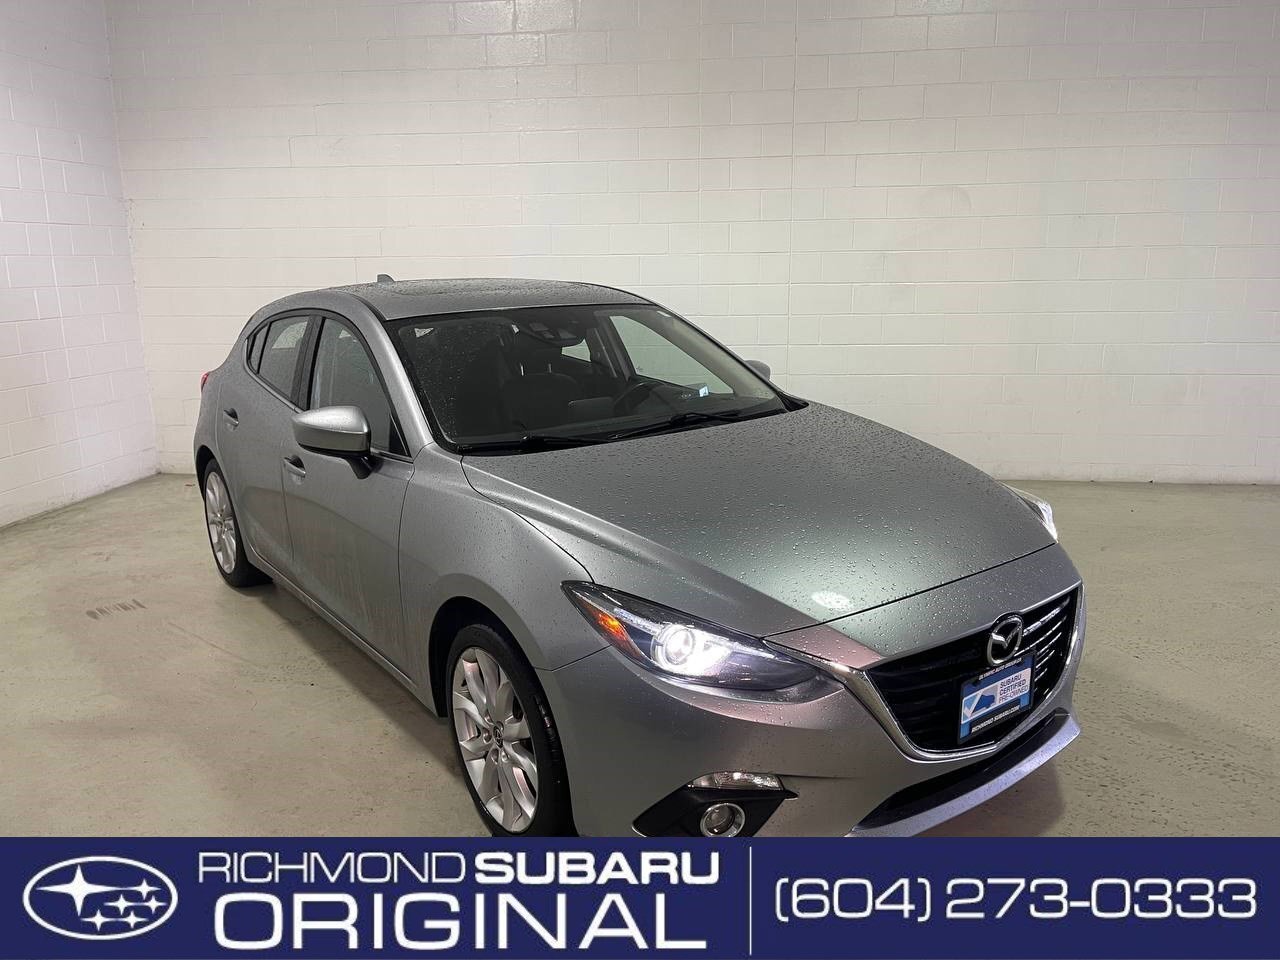 2015 Mazda Mazda3 GT | LOW MILEAGE, CLEAN TITLE | CALL TO RESERVE